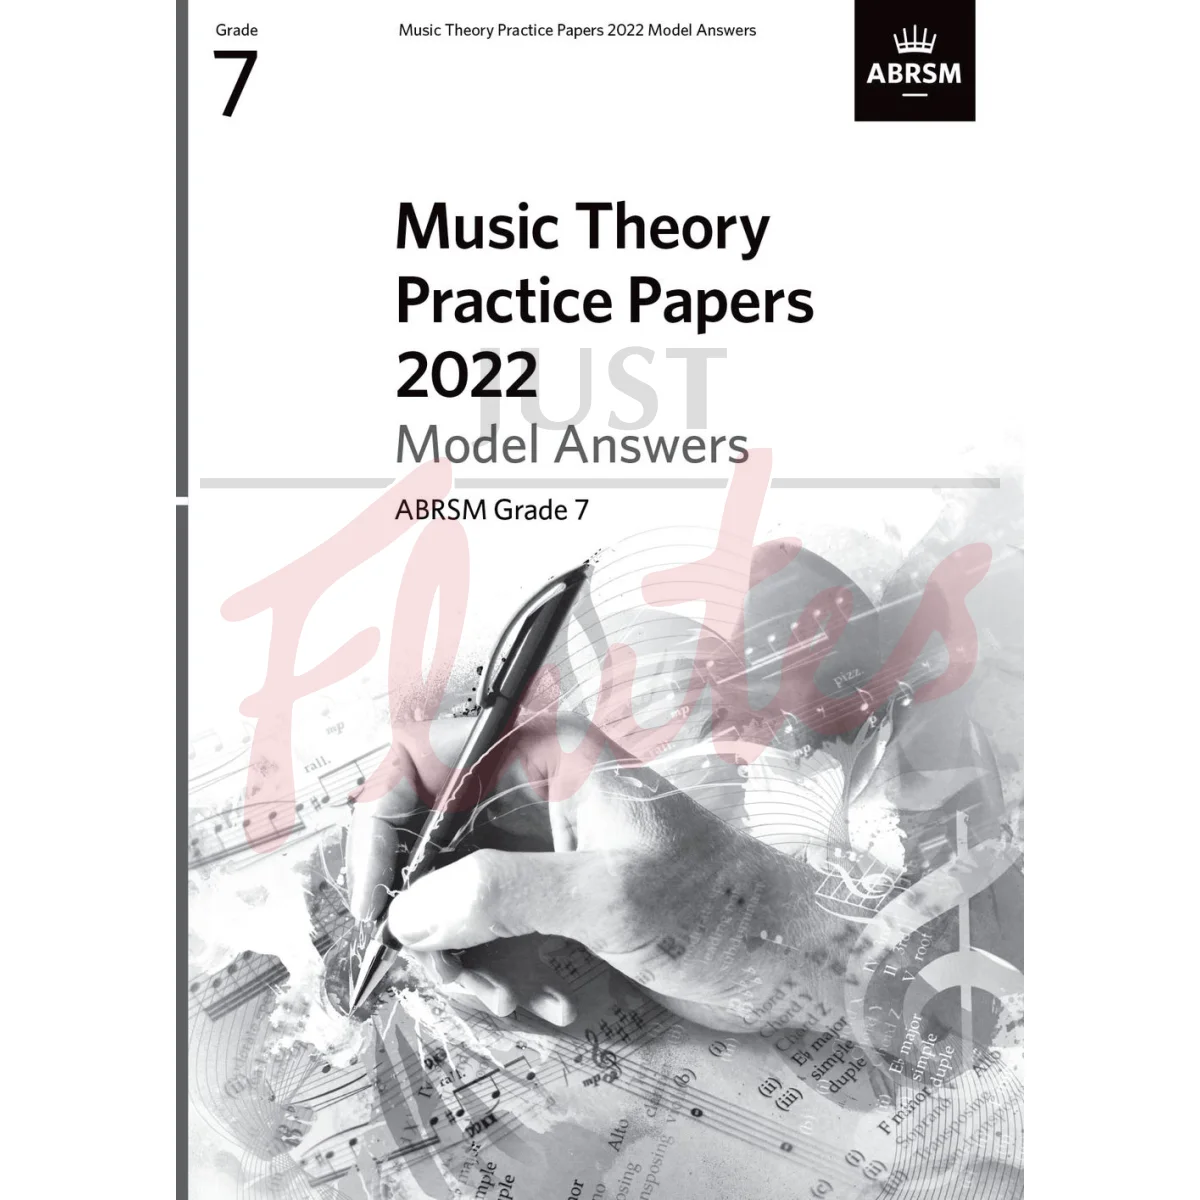 Music Theory Practice Papers 2022 Grade 7 - Model Answers